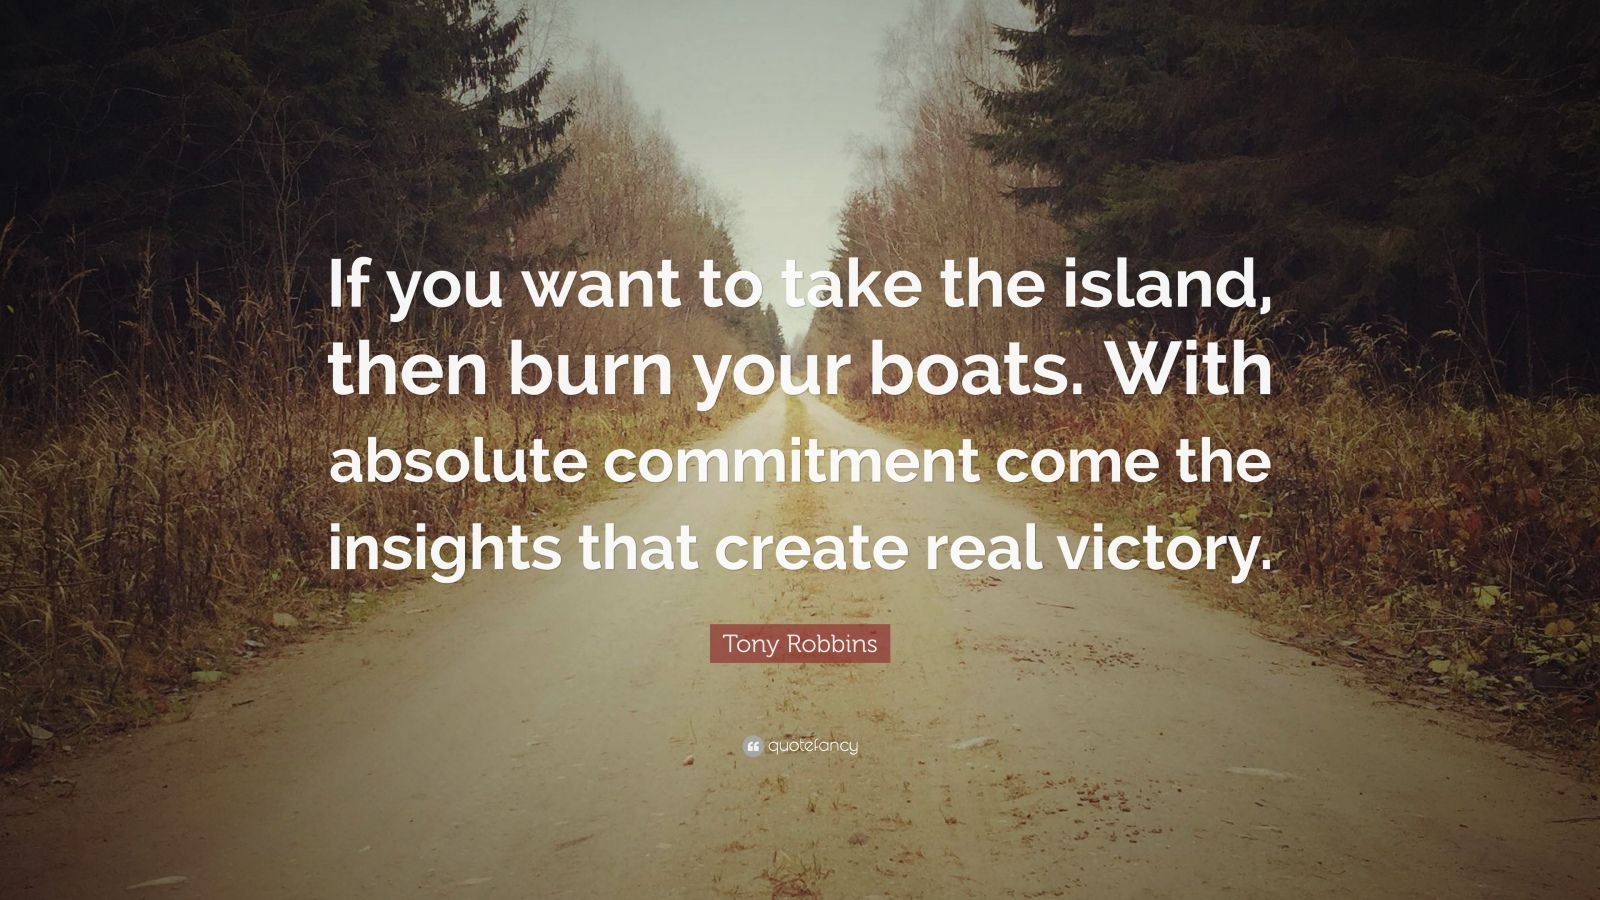 Tony Robbins Quote: “If you want to take the island, then burn your